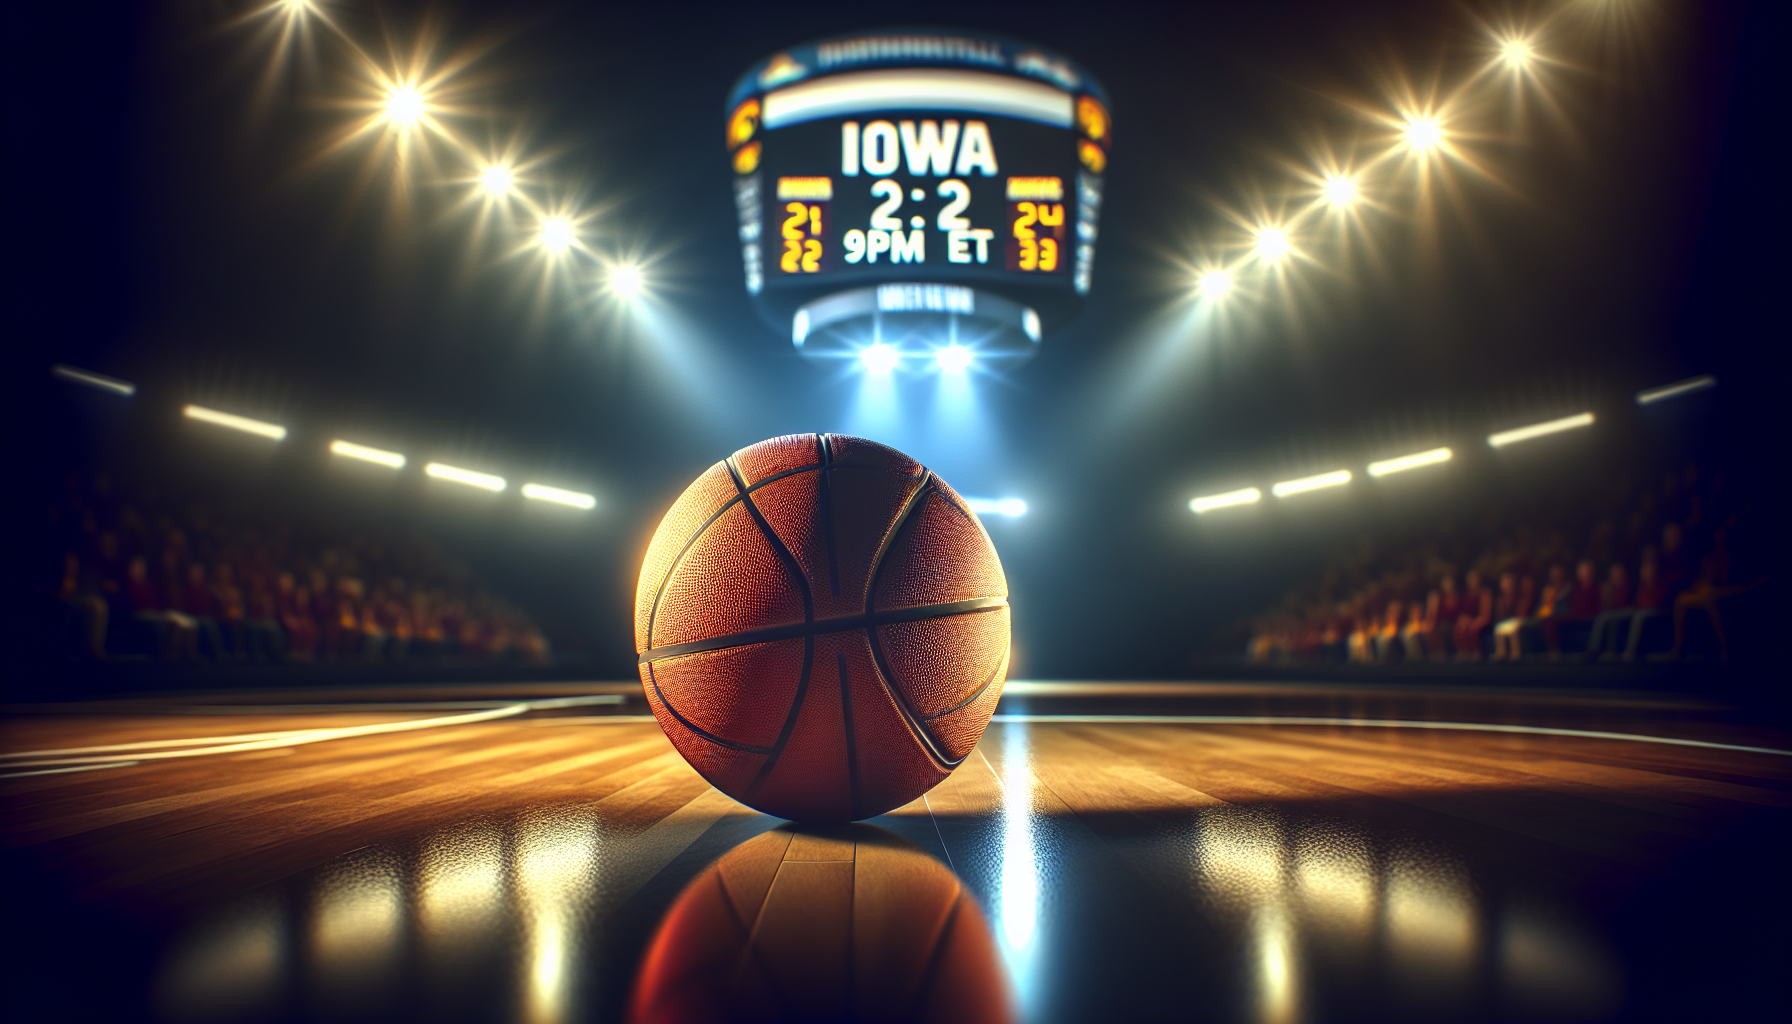 Live stats for Women’s Basketball at Iowa on January 2, 2024
at 9 PM ET